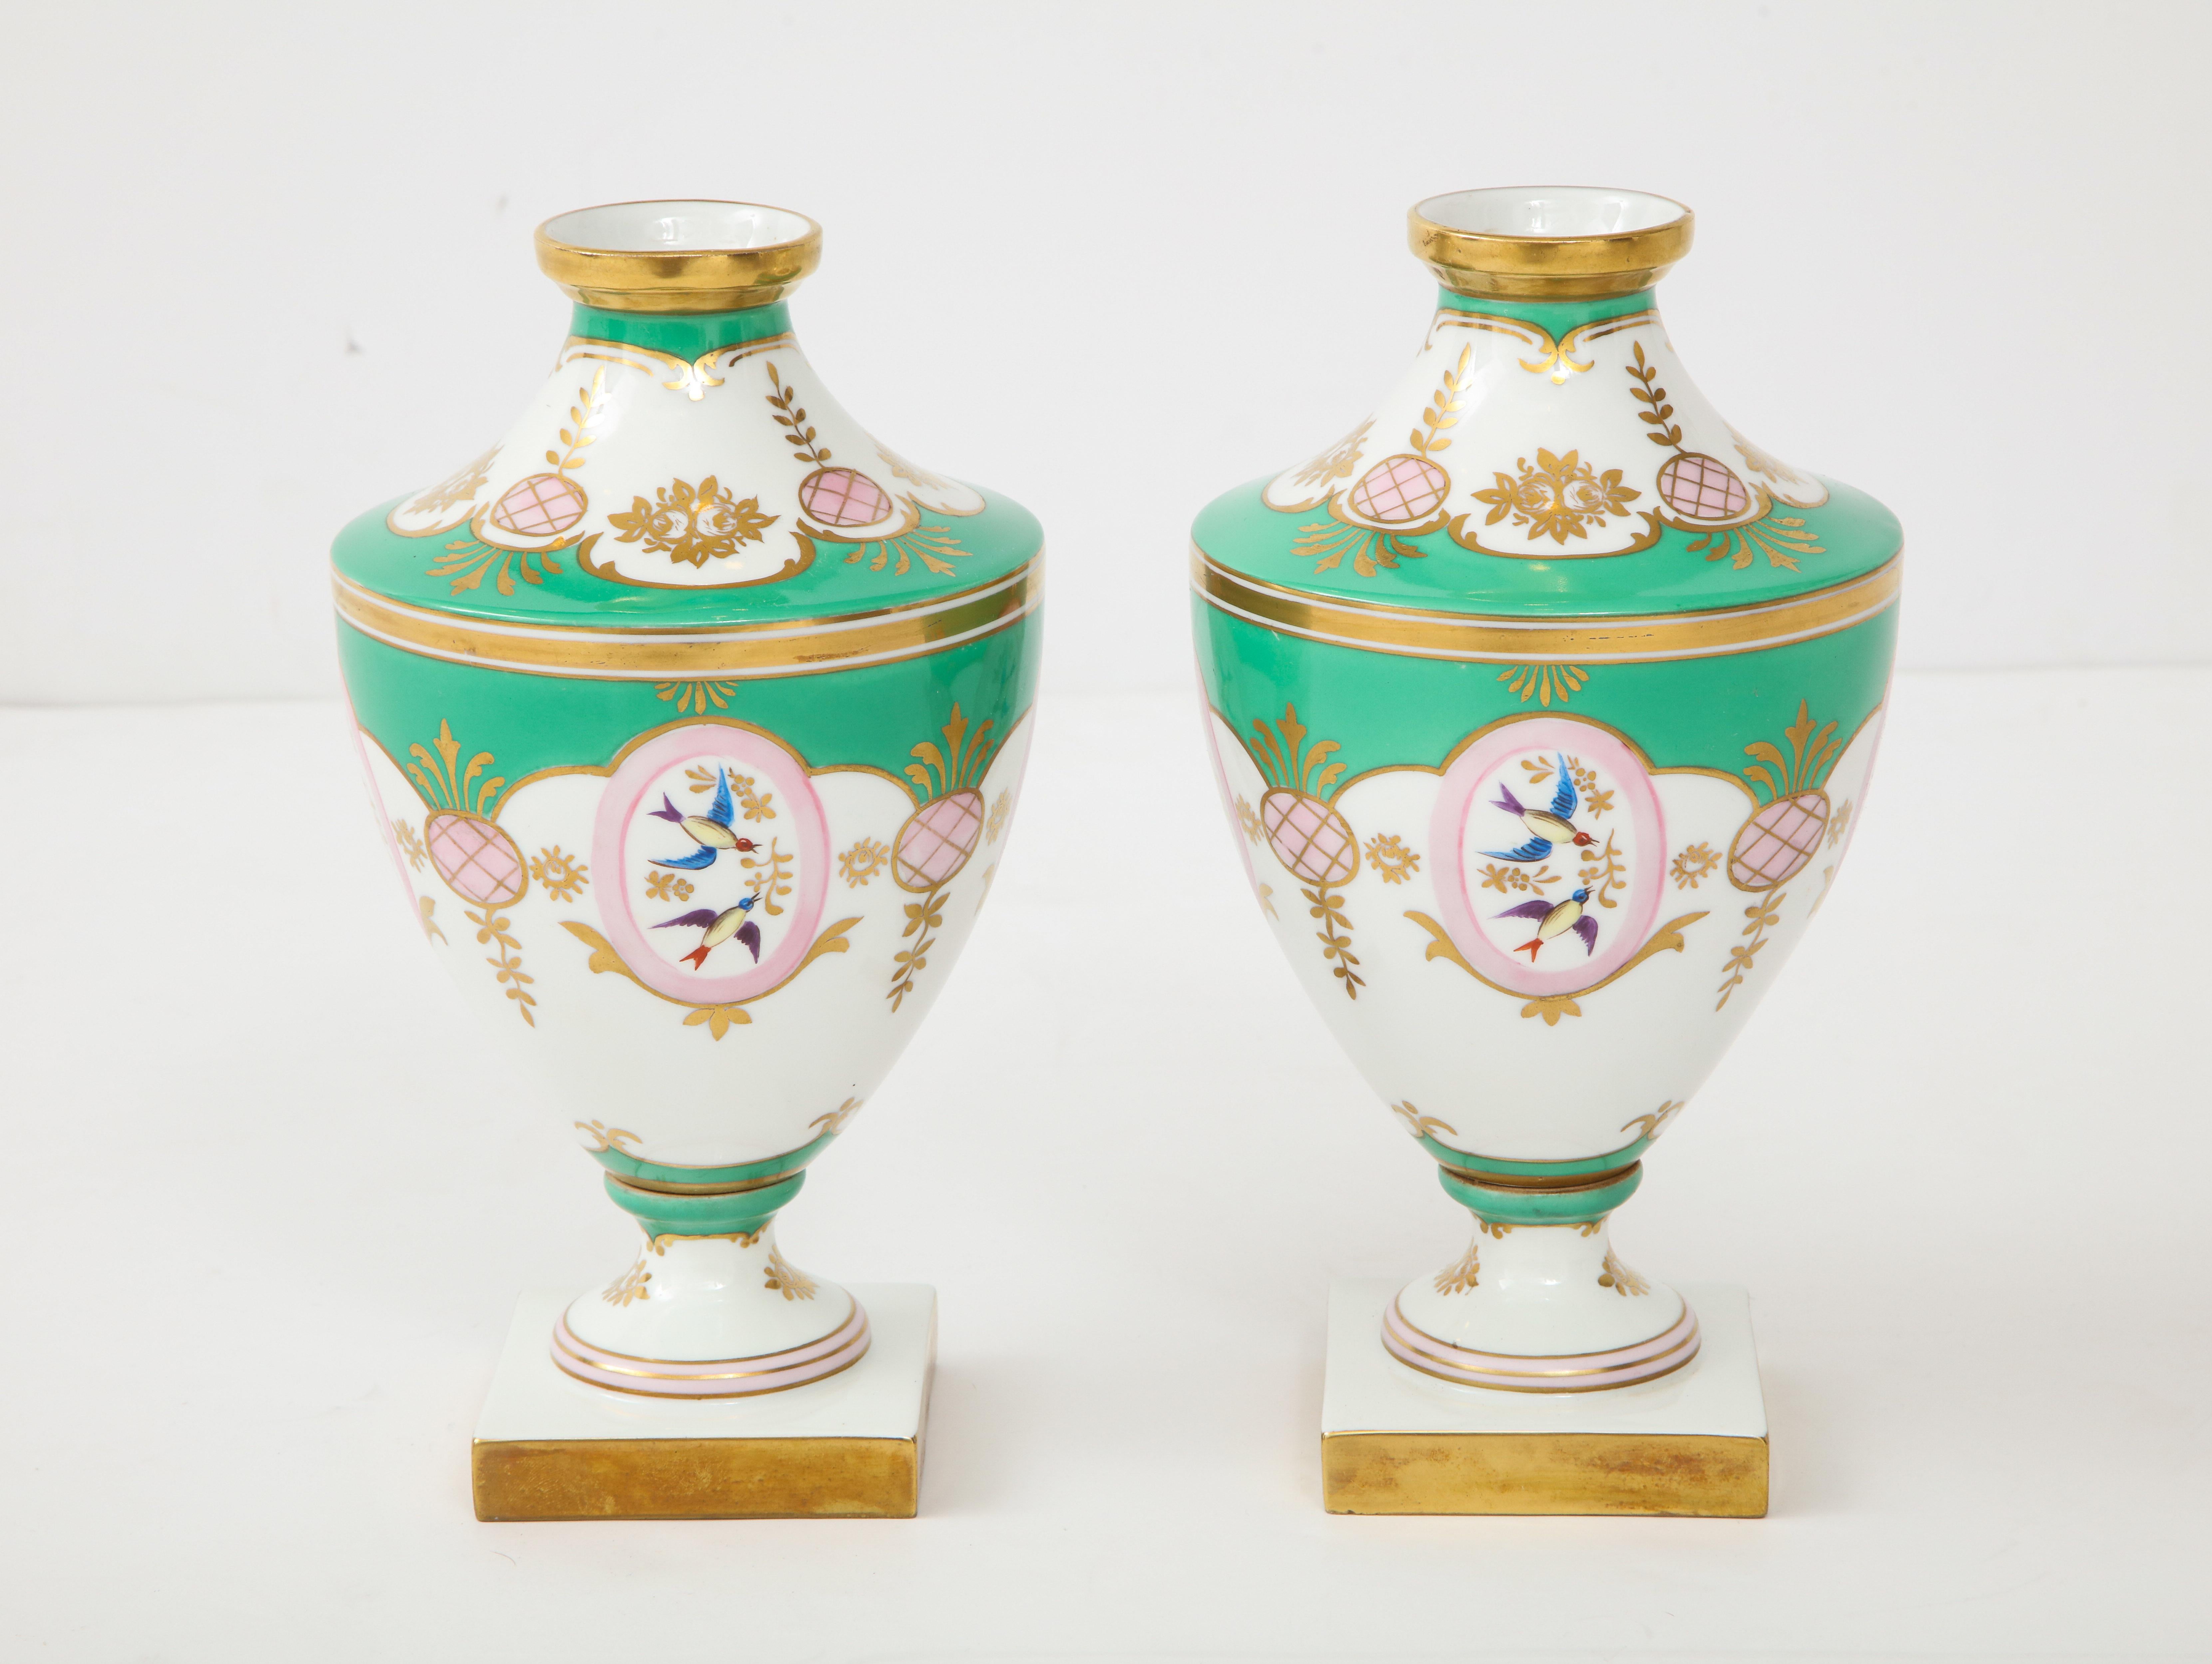 Pair of exquisite 19th century hand decorated porcelain urn vases depicting blue birds in flight against white and pistachio green backgrounds, 22-karat gold trim.